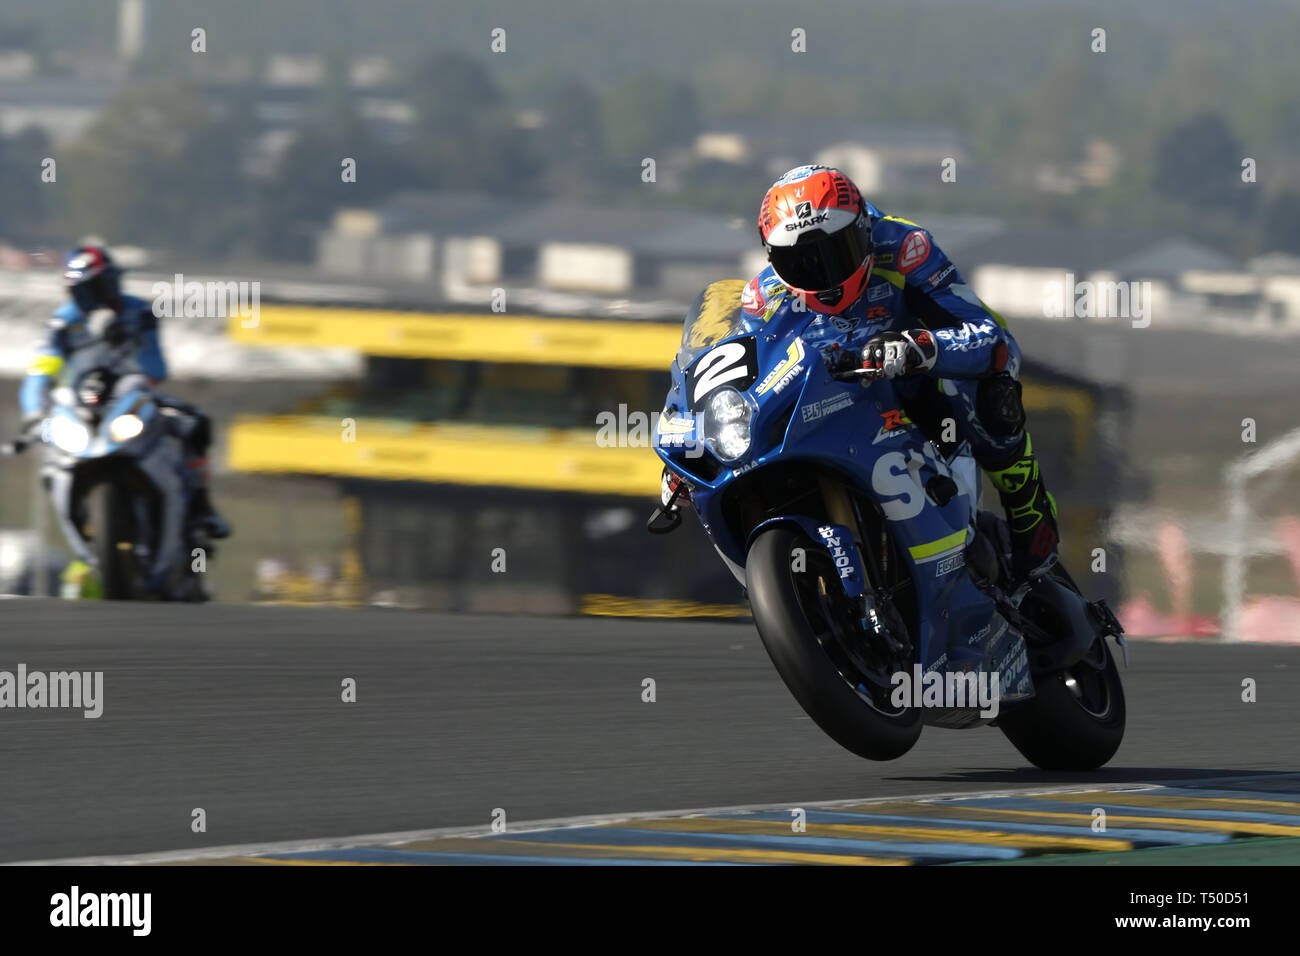 Le Mans, Sarthe, France. 19th Apr, 2019. Suzuki Endurance Racing Team  Suzuki GSXR 1000 - French rider ETIENNE MASSON in action during the 42th  edition of the 24 hours motorcycle of Le